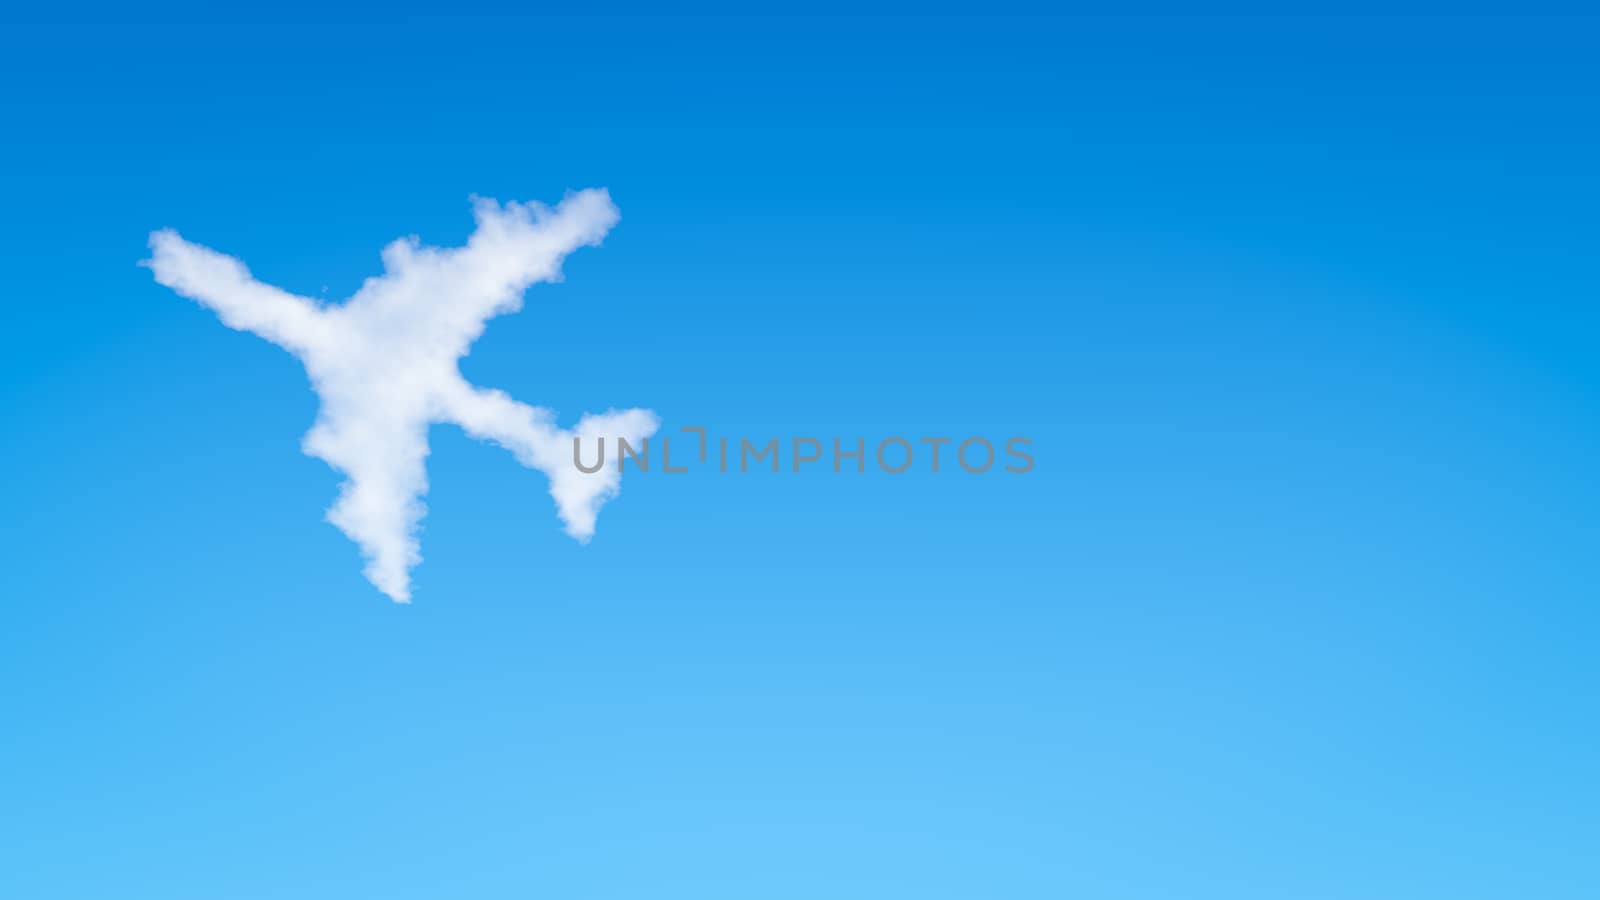 Airplane Shape Cloud in the Blue Sky with Copyspace